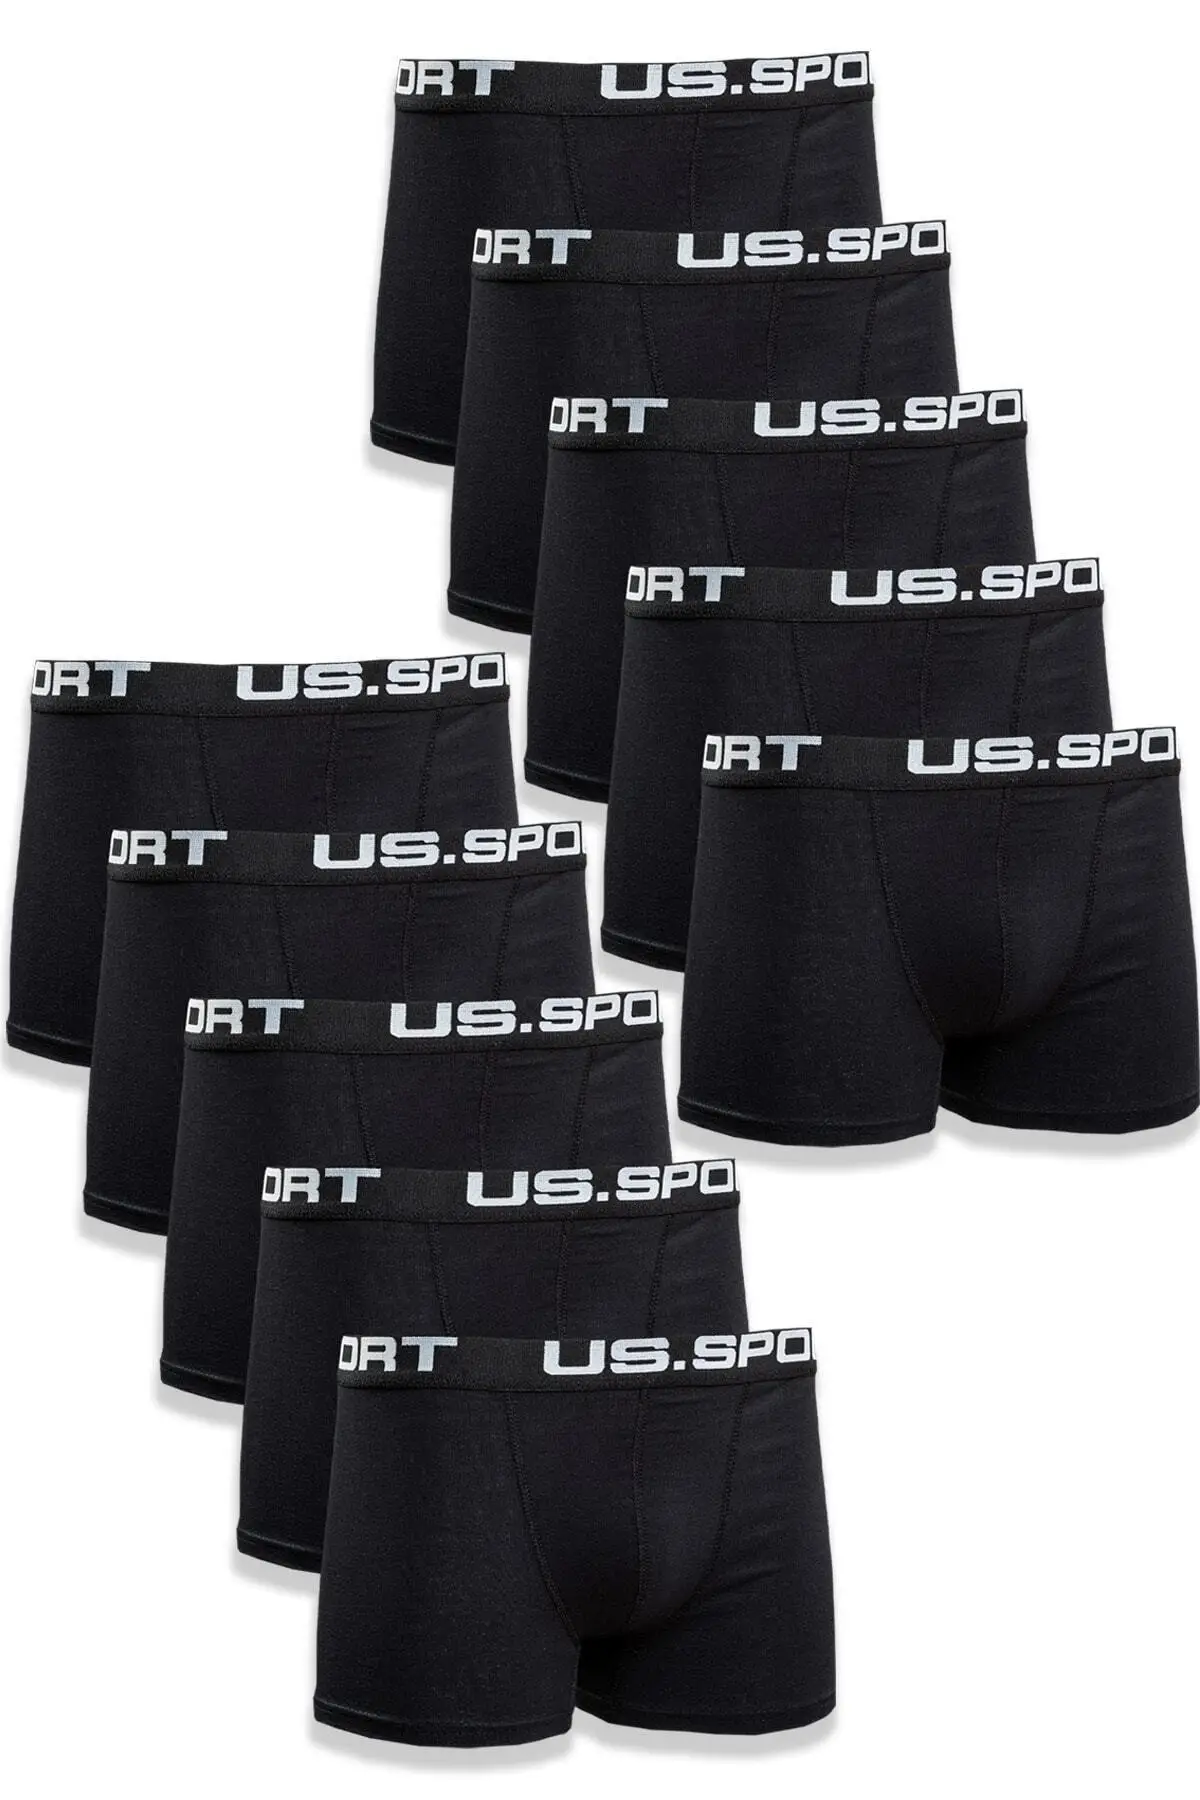 boxer quality comfortable cotton underwear panties made in Turkey Reasonable price clothing male